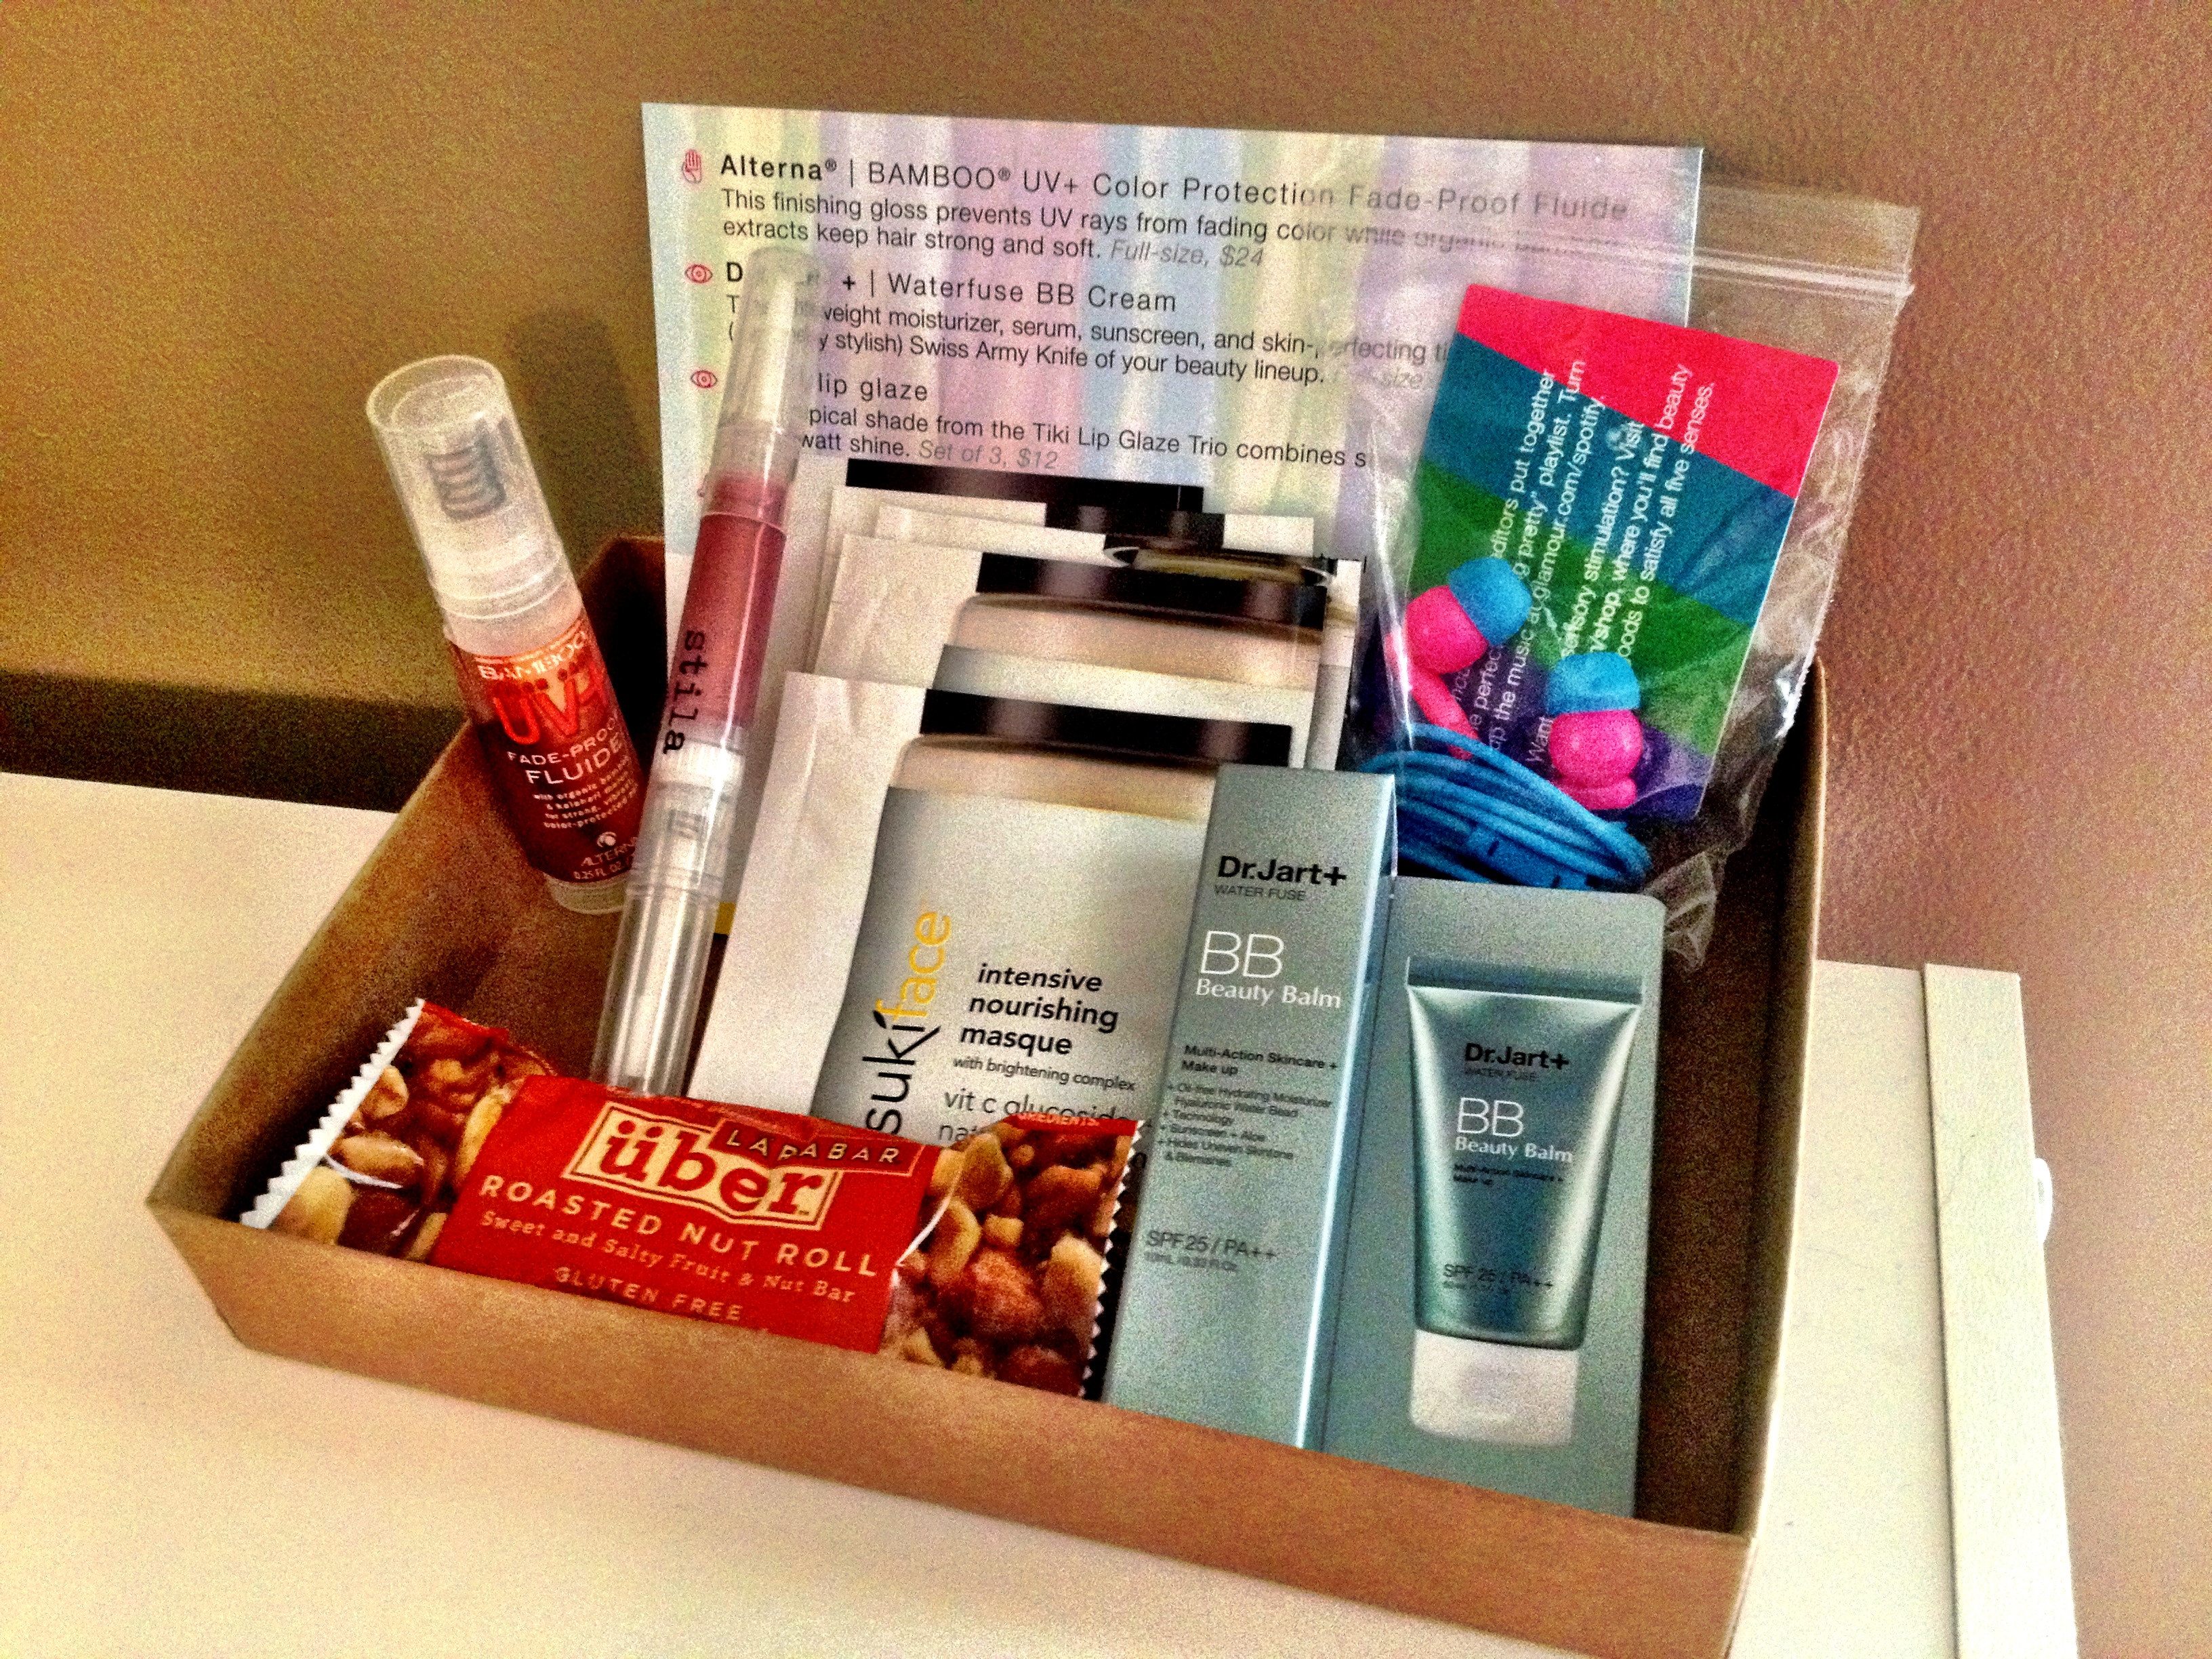 The Birchbox was sponsored by Glamour, which meant it was super amazing